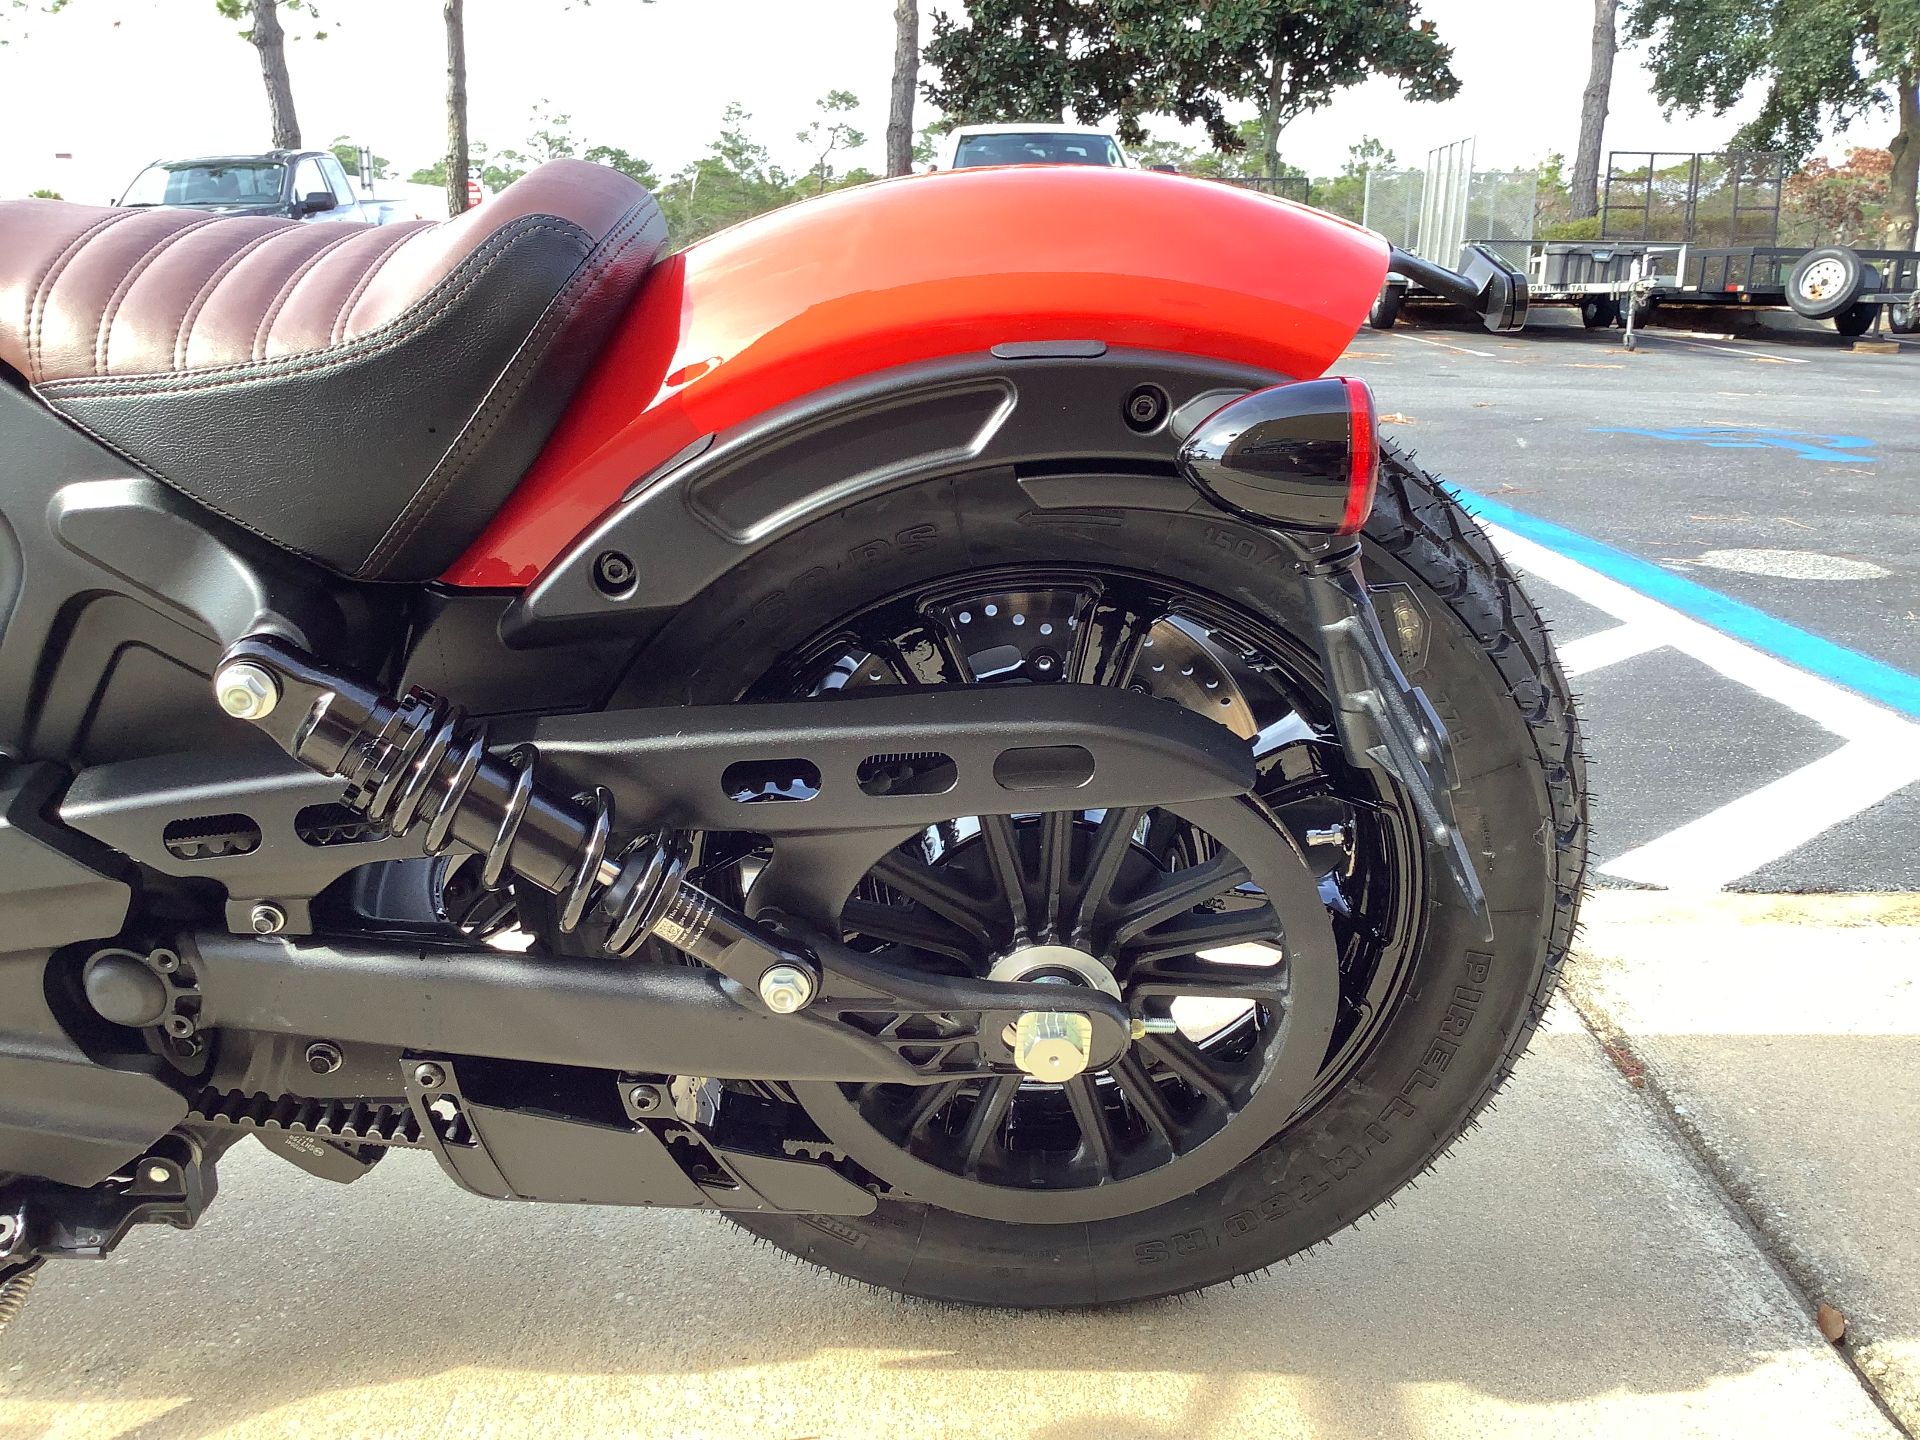 2021 Indian BOBBER ABS   ICON SERIES in Panama City Beach, Florida - Photo 9